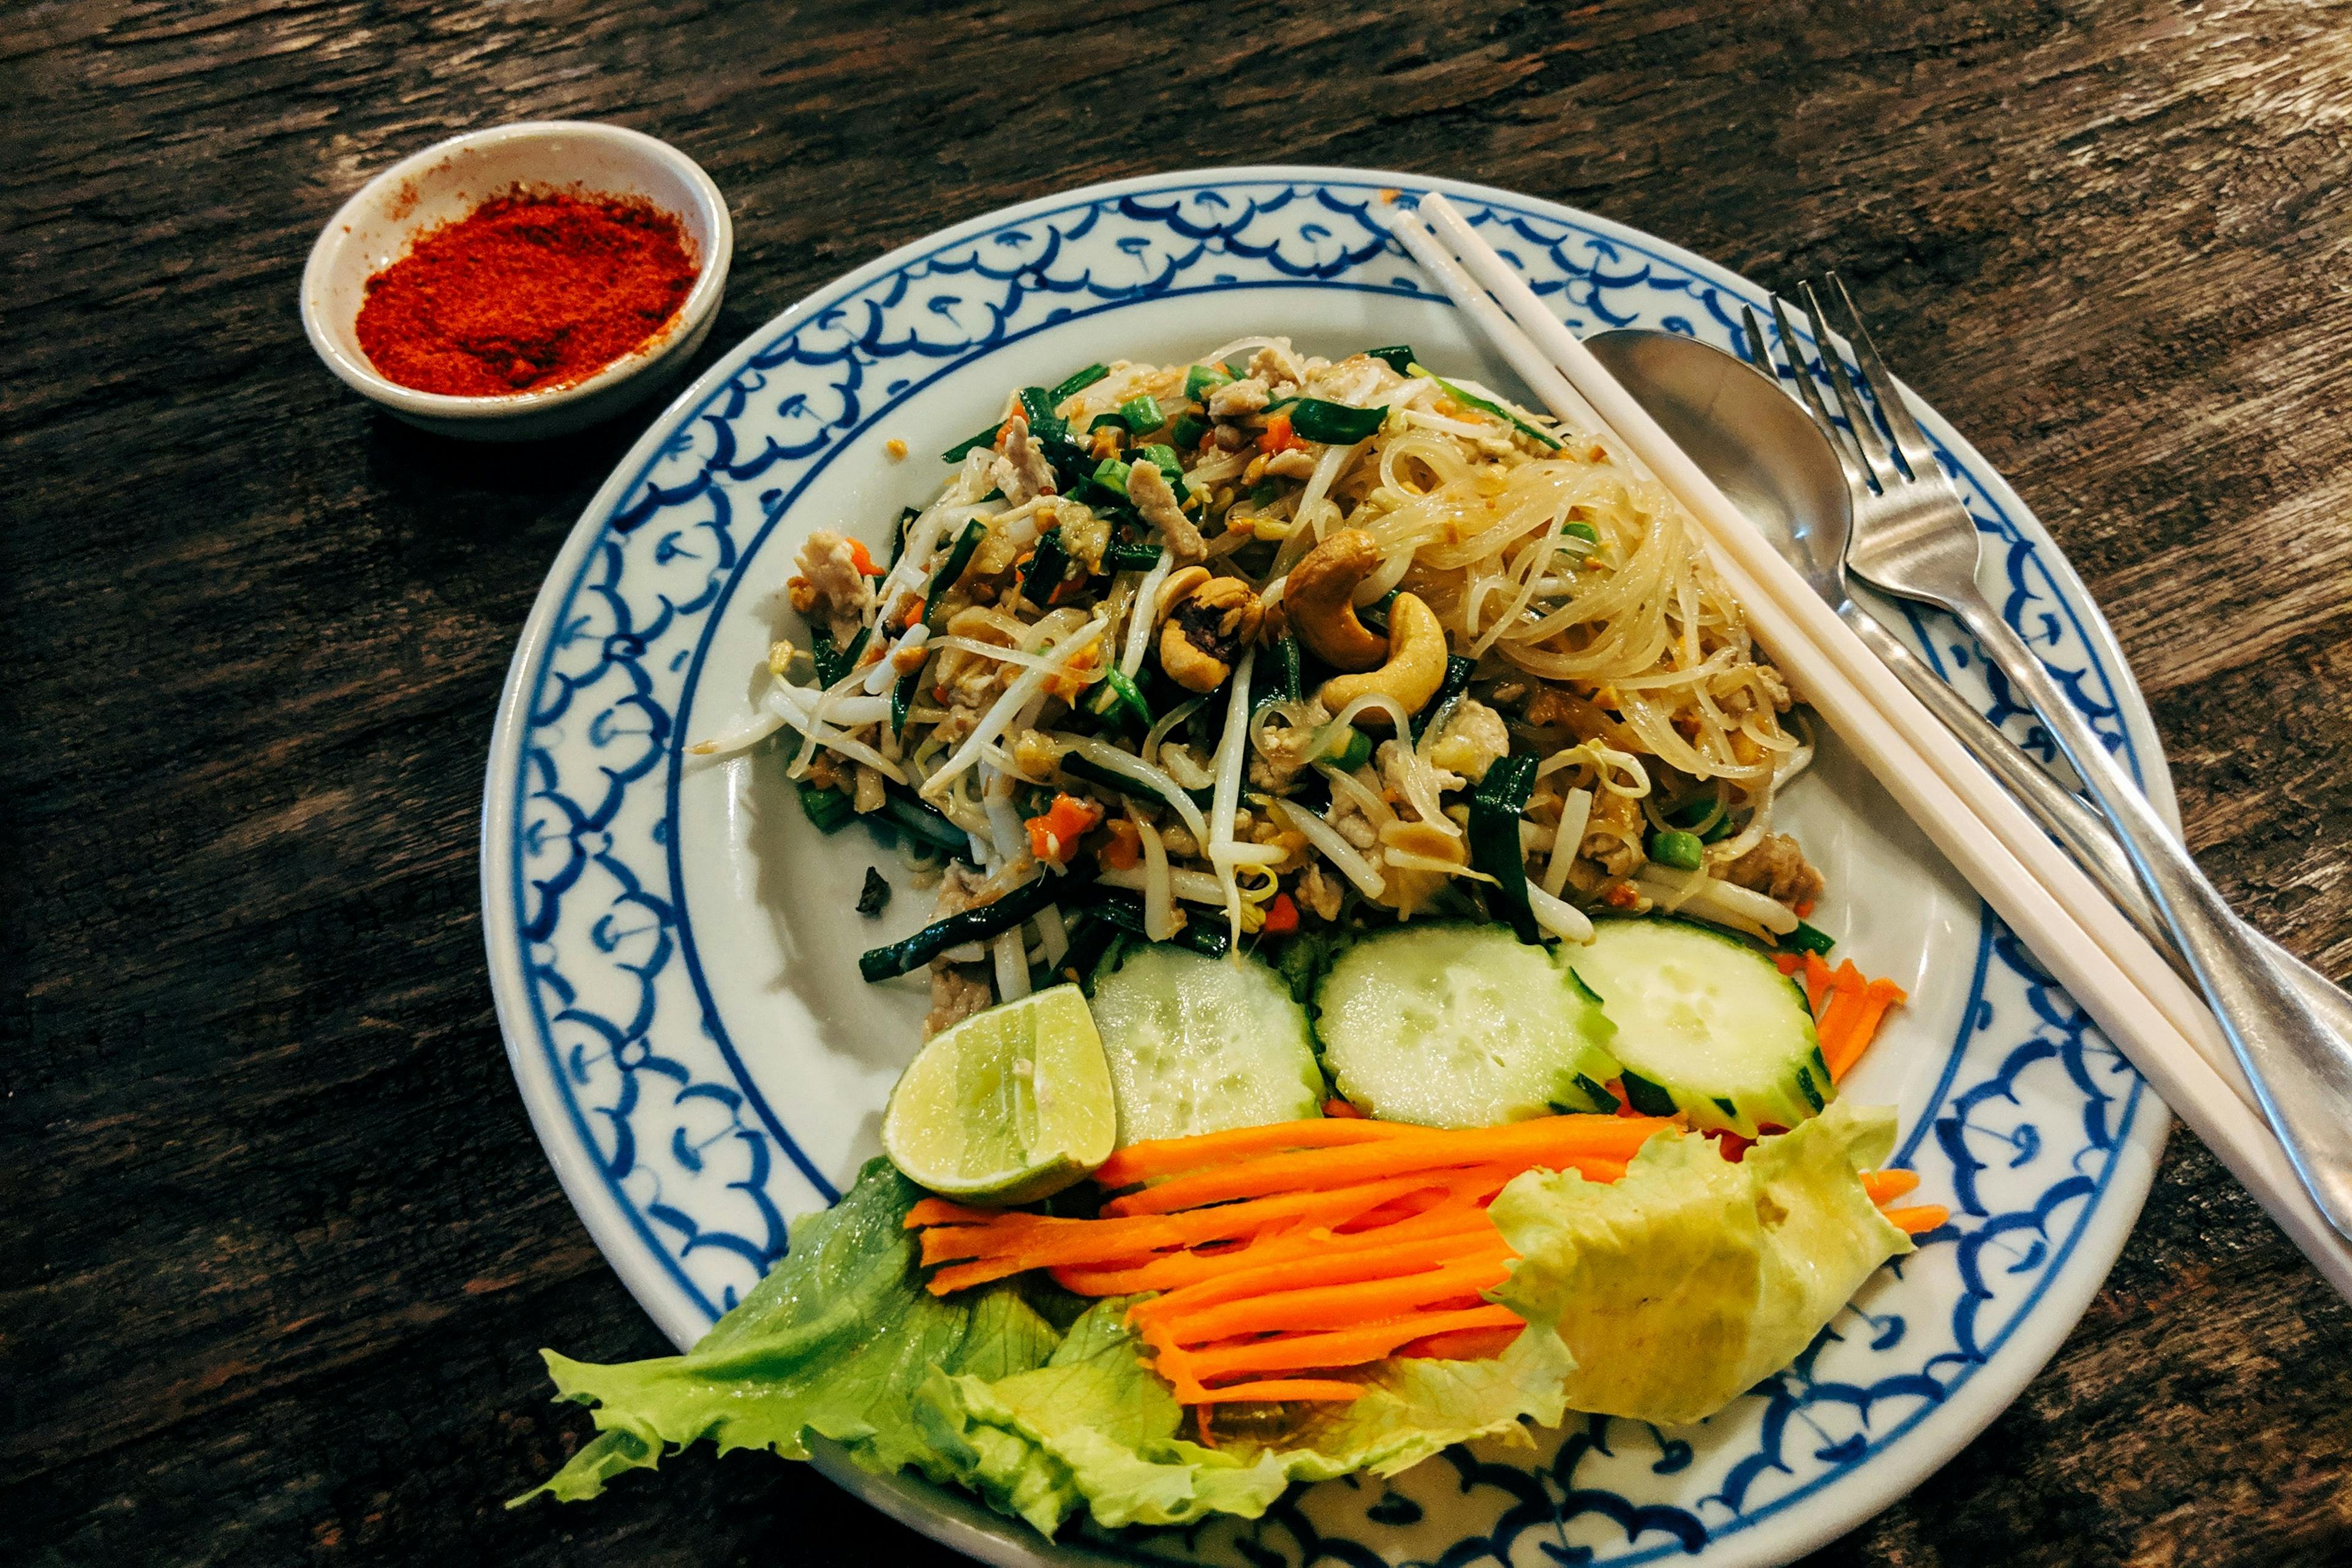 Traditional pad thai dish in Thailand.